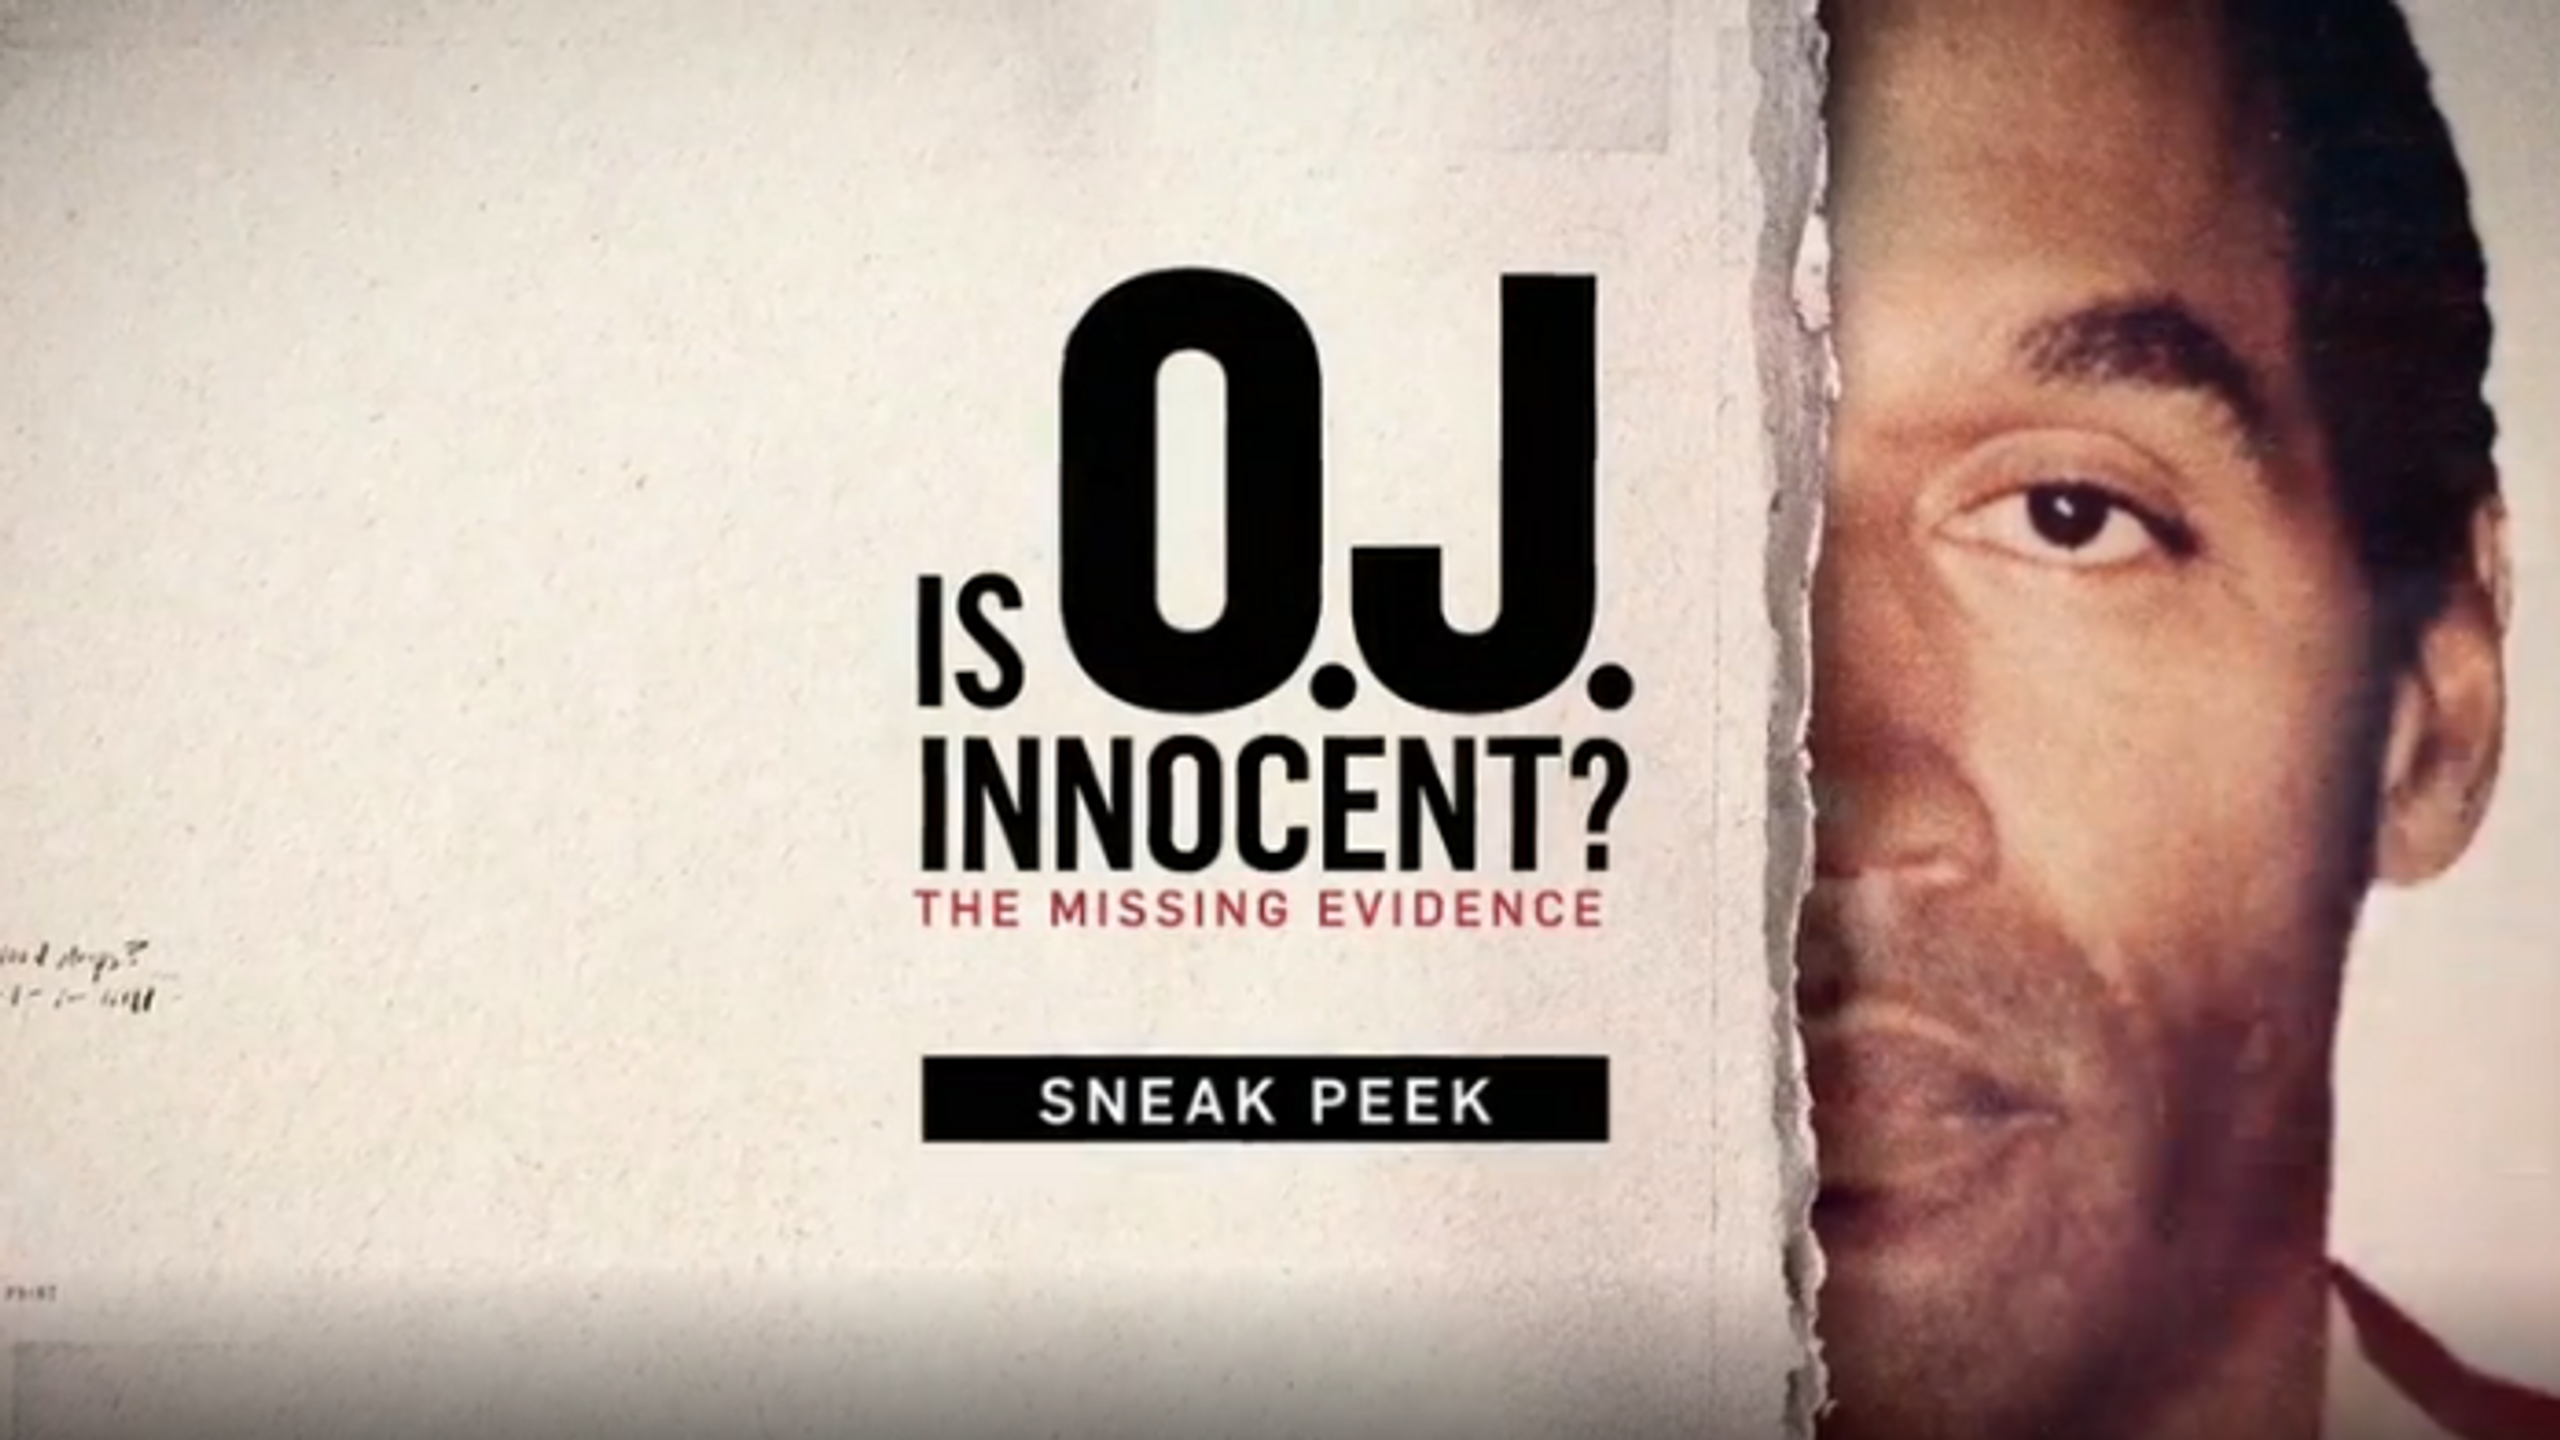 Is O.J Innocent? - The Missing Evidence